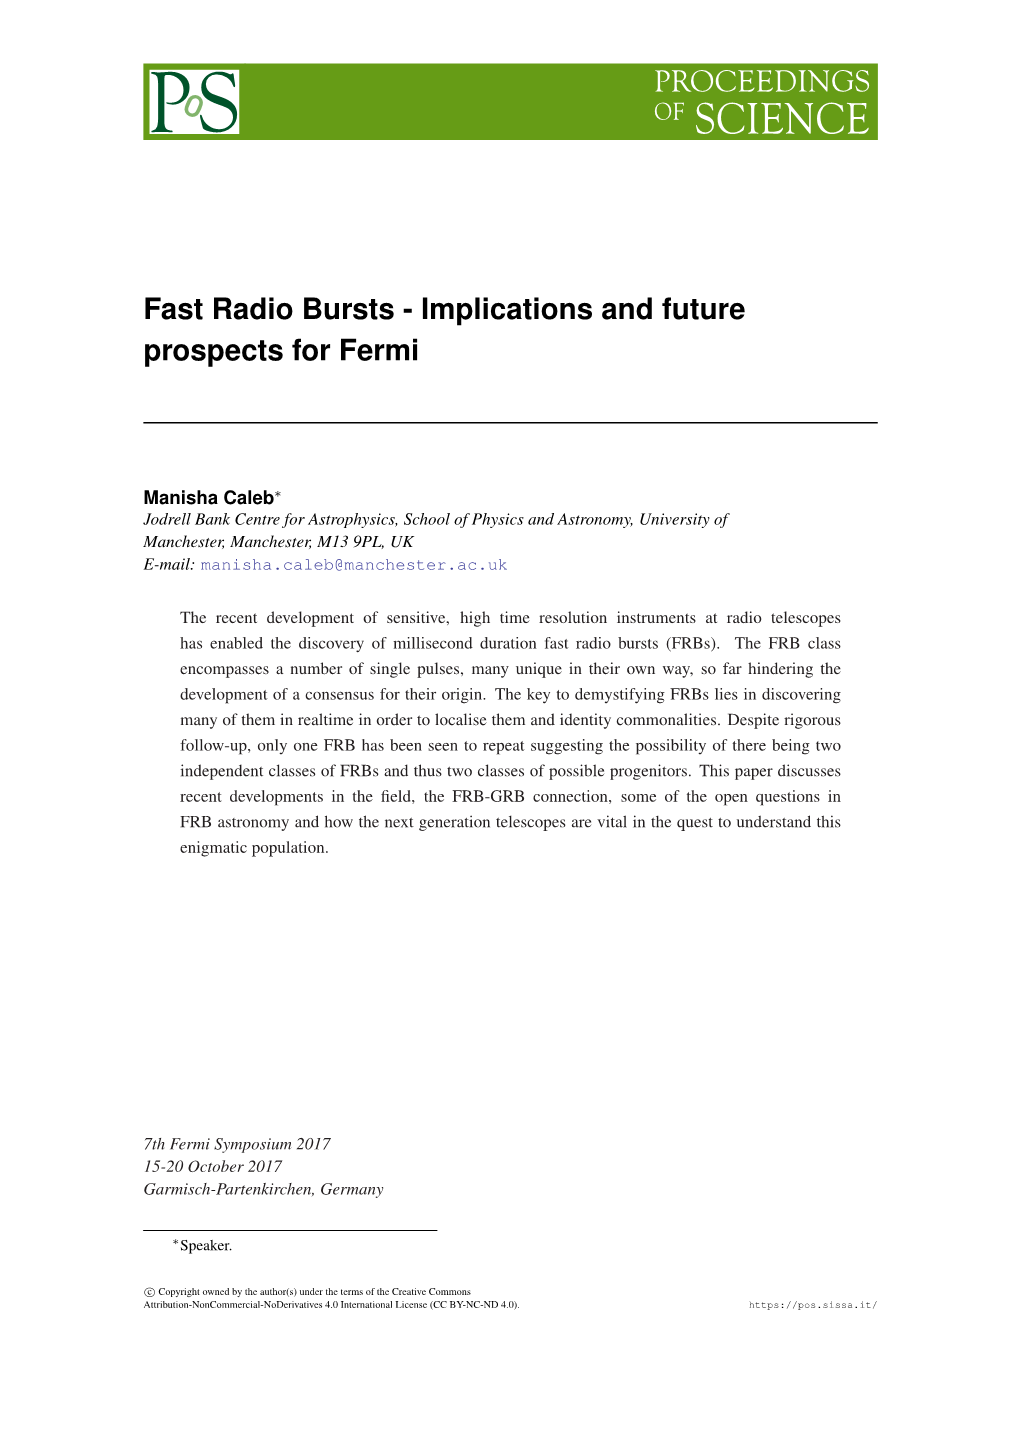 Fast Radio Bursts - Implications and Future Prospects for Fermi